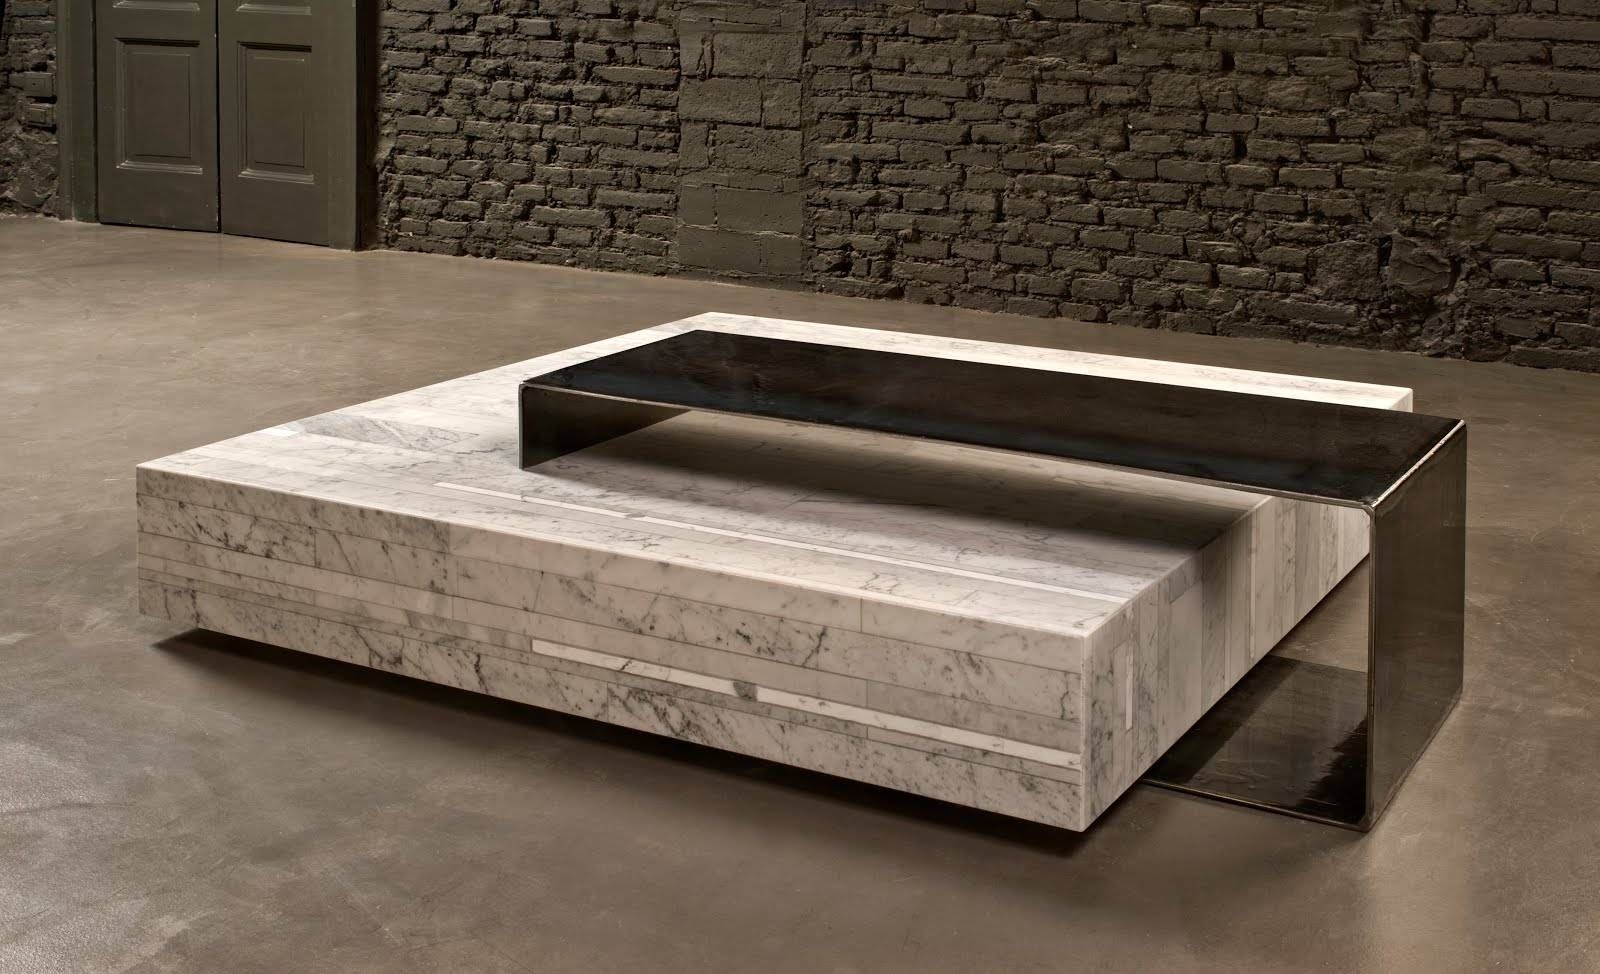 Marble Stone Coffee Table | Itsbodega | Home Design Tips 2017 Within Stone Coffee Table (View 15 of 15)